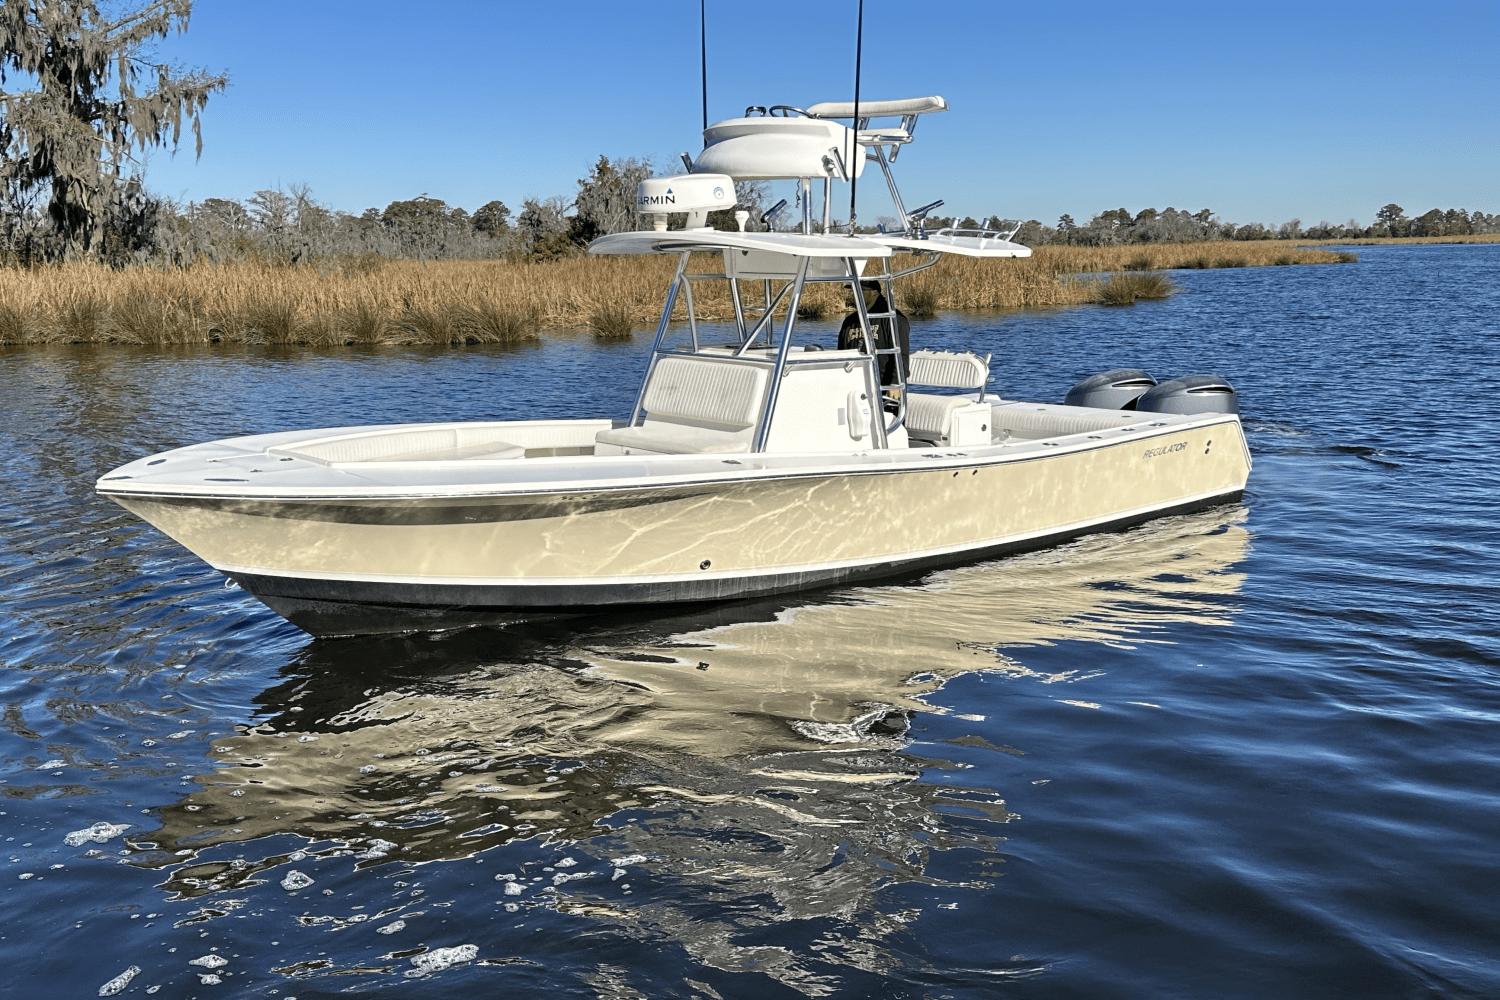 Page 24 of 250 - Used saltwater fishing boats for sale - boats.com